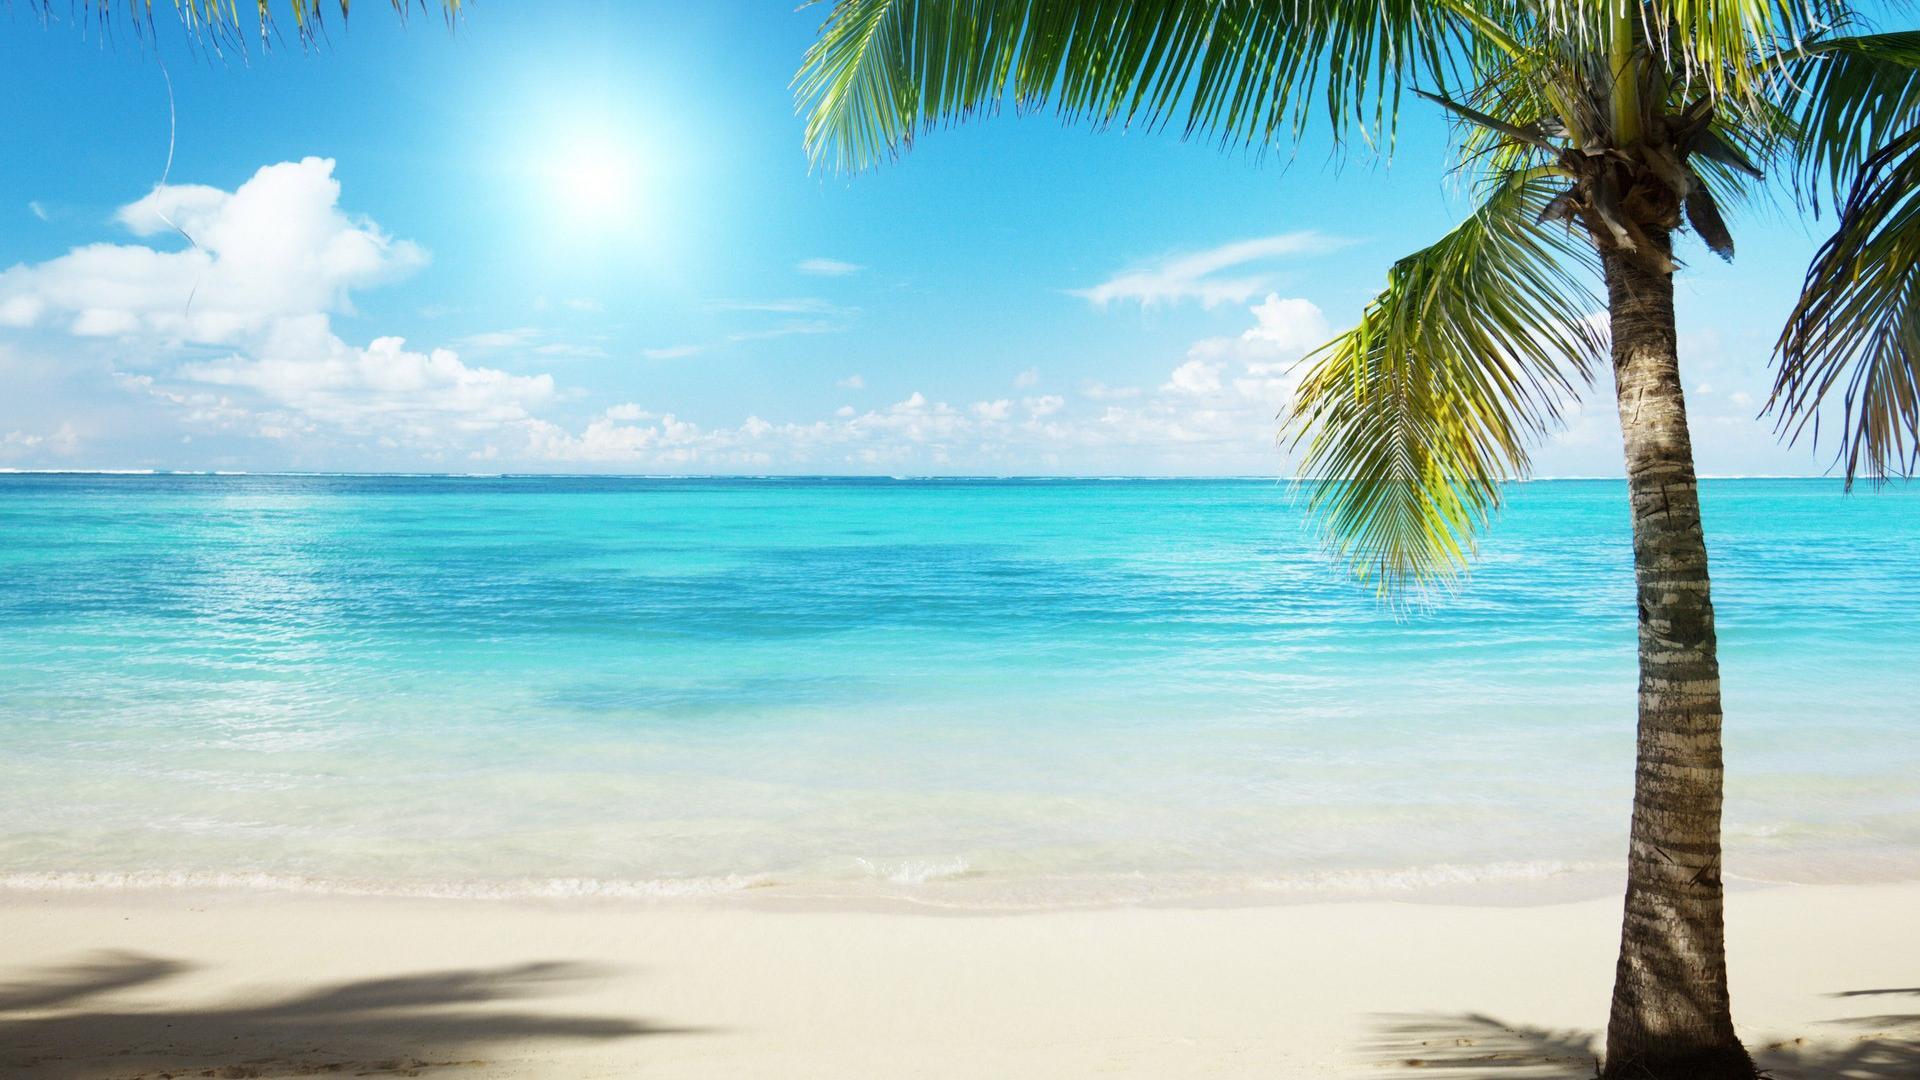 Download wallpaper 750x1334 tropical beach sea sunny day blue sky  nature iphone 7 iphone 8 750x1334 hd background 23704